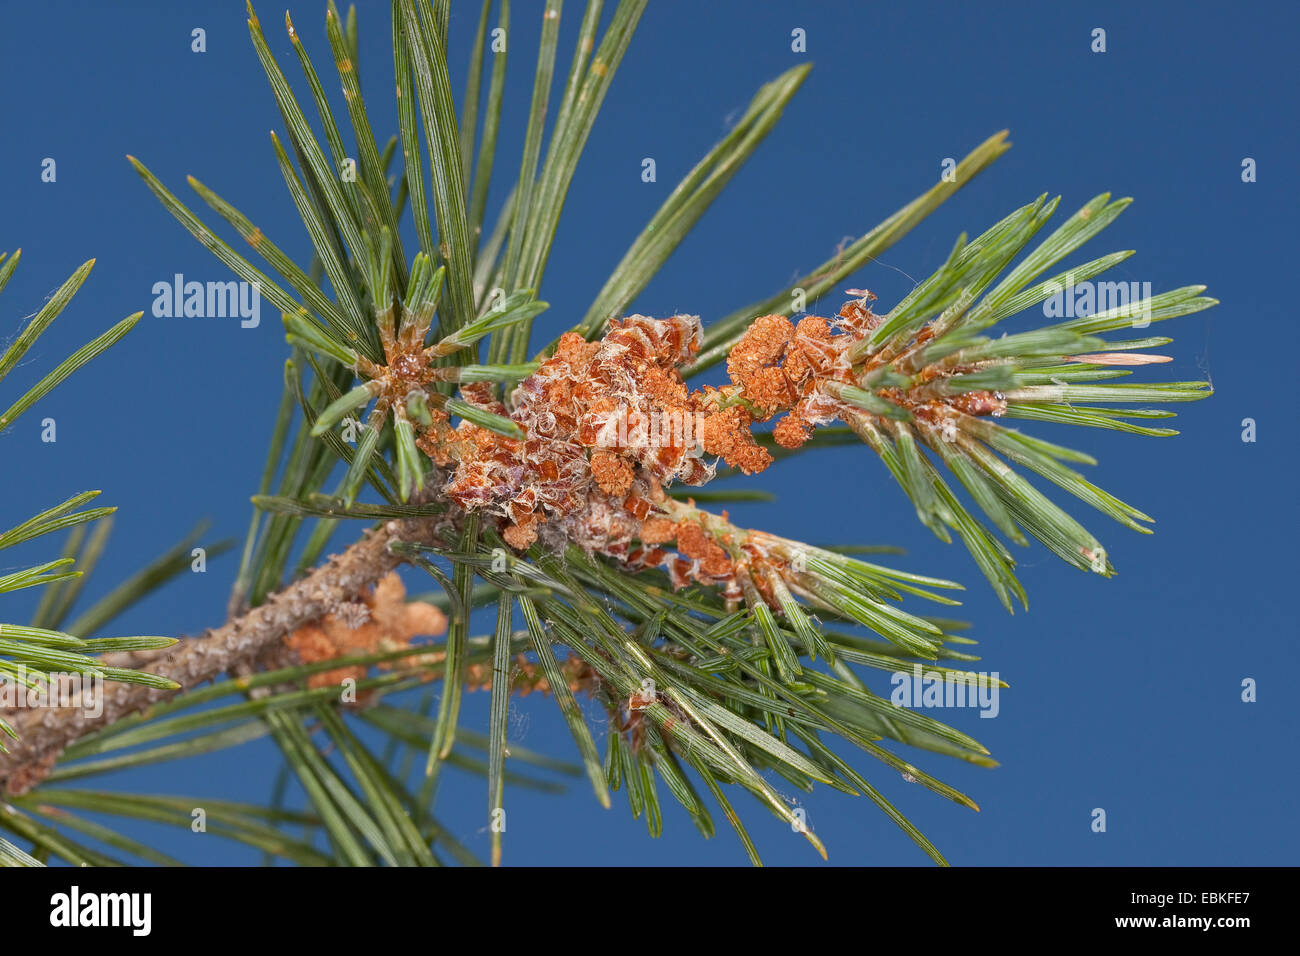 Scotch pine, scots pine (Pinus sylvestris), branch with male flowers, Germany Stock Photo